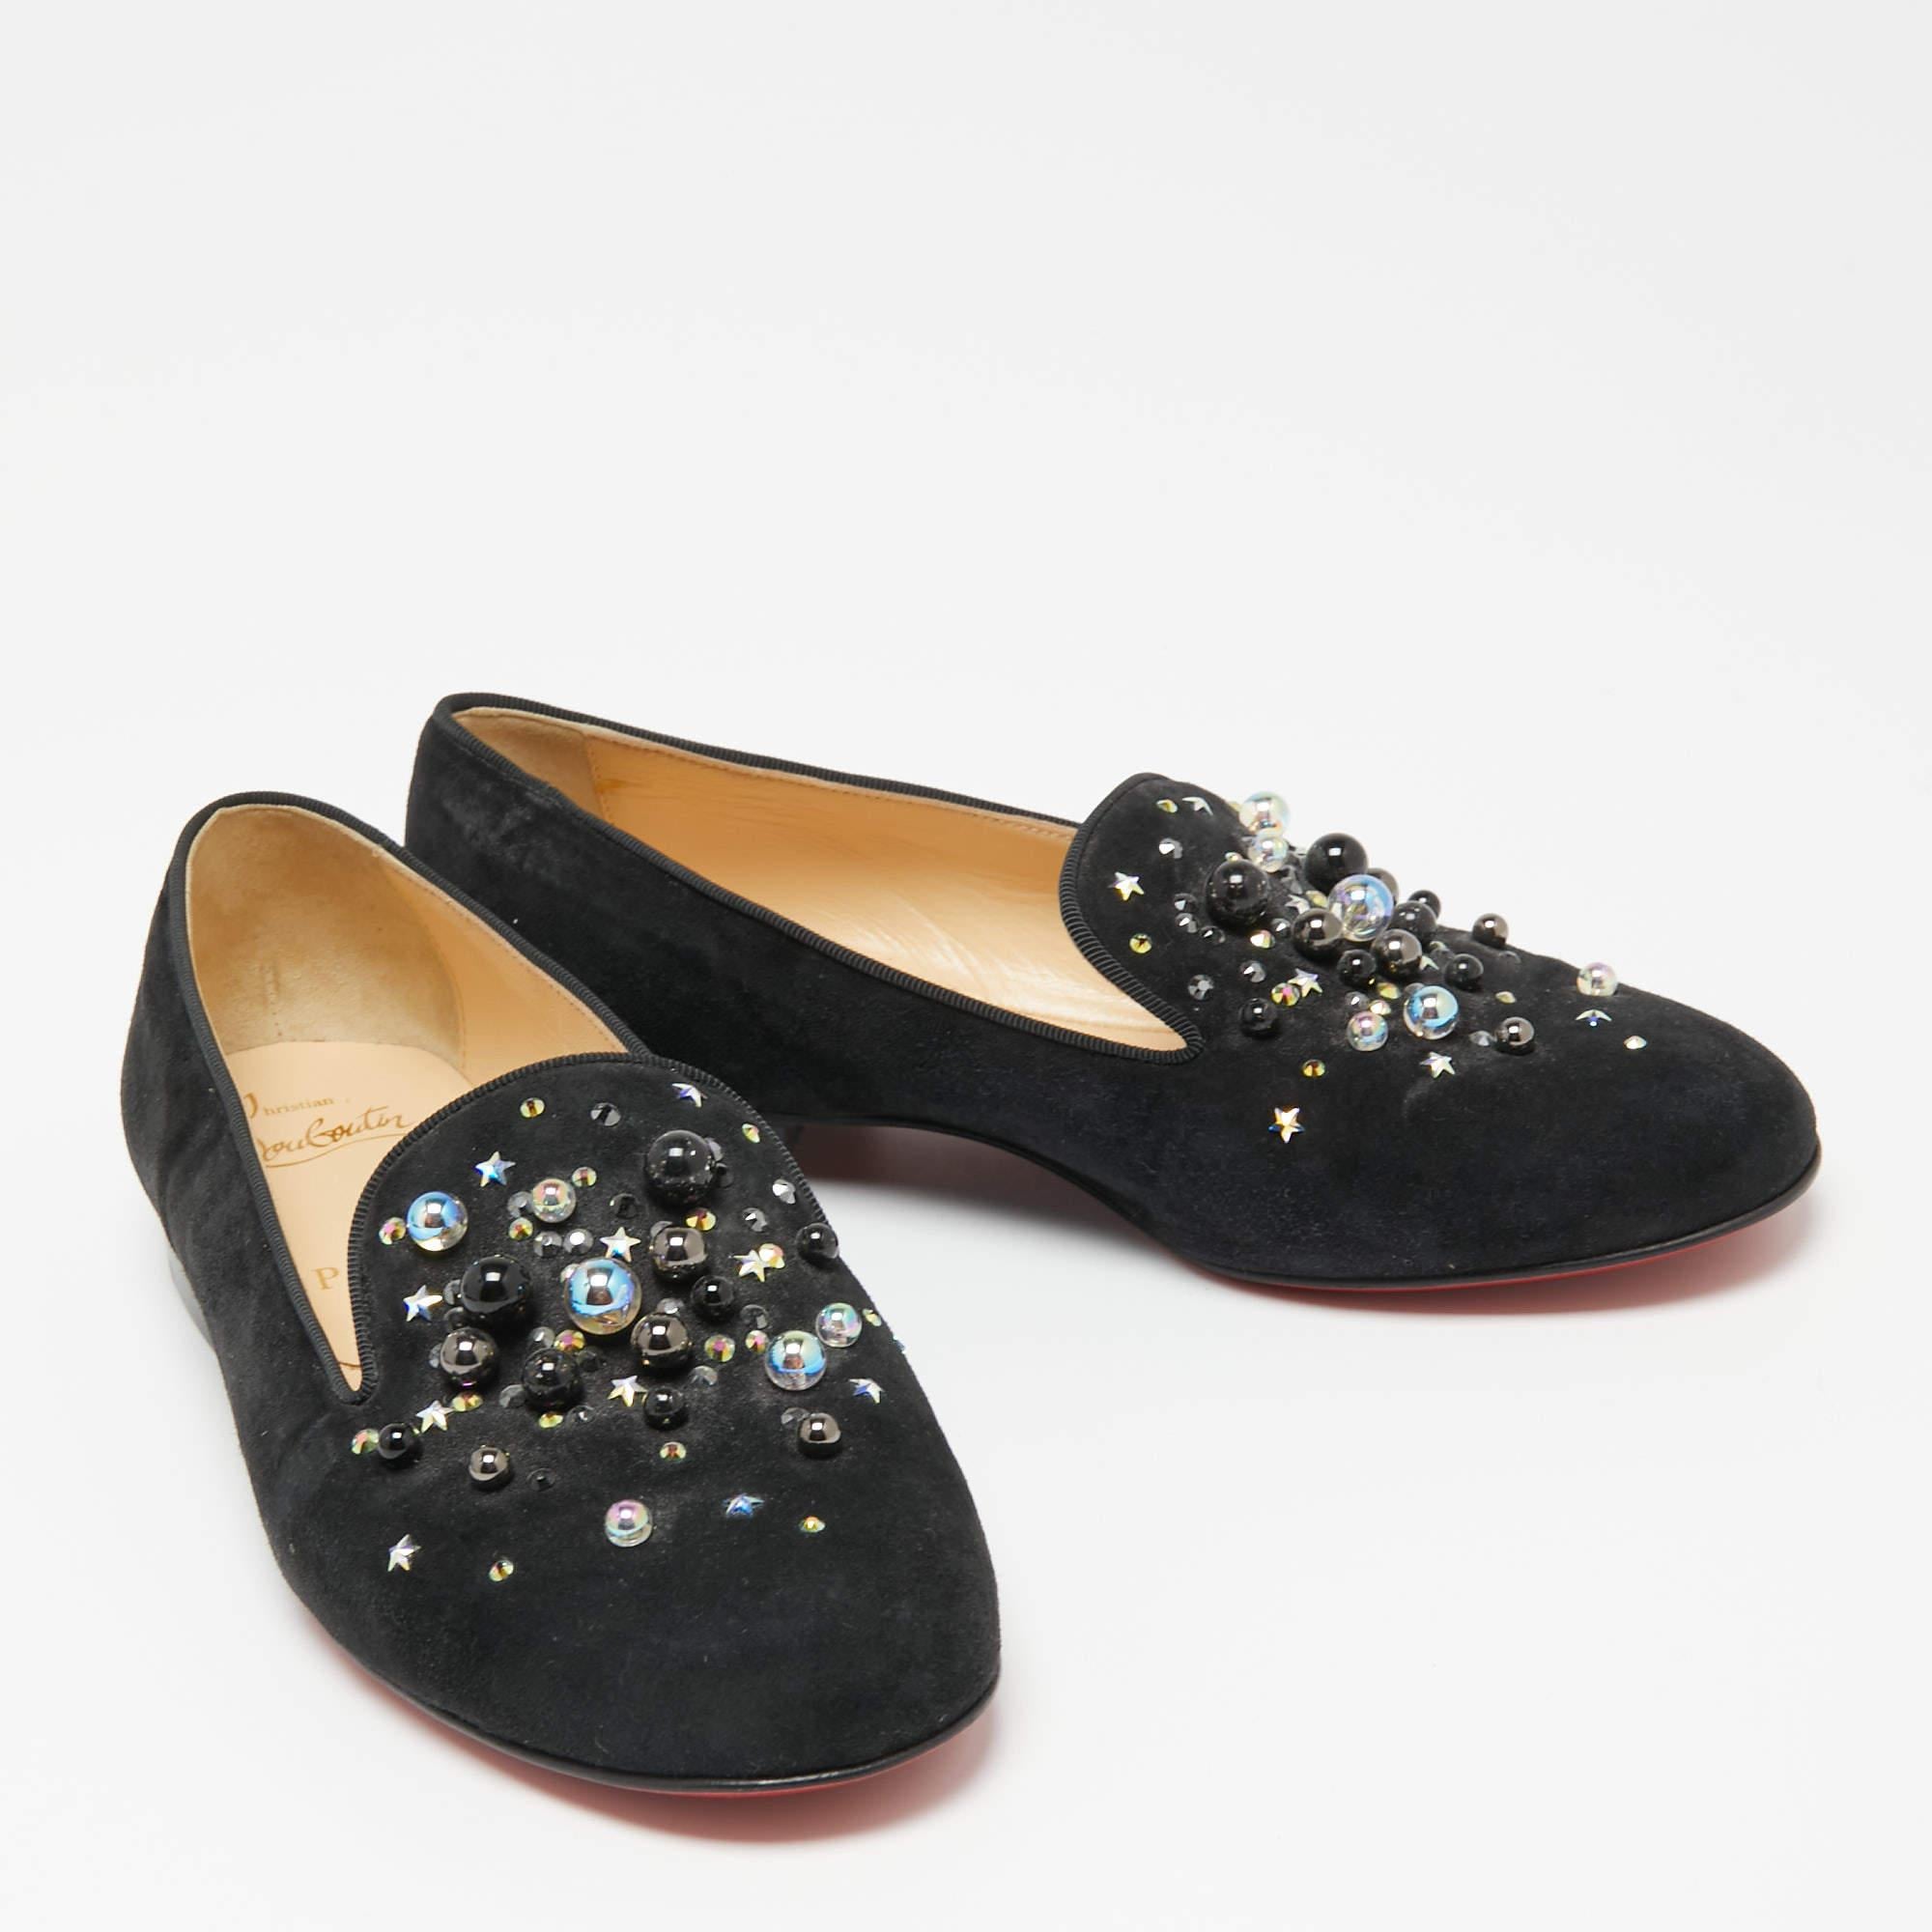 Christian Louboutin Black Suede Candy Studded Smoking Slippers Size 36 1